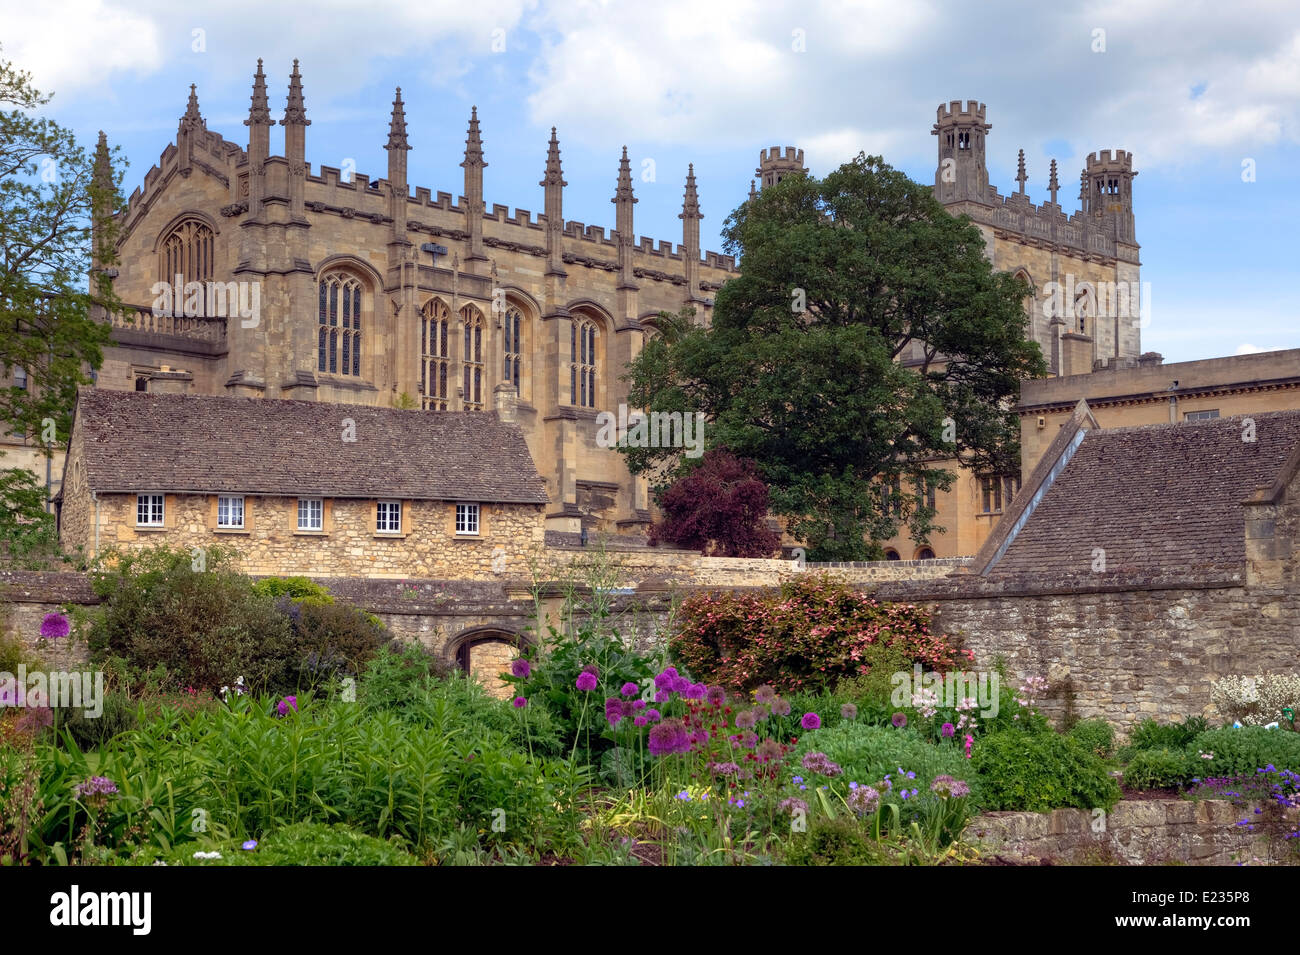 Christ Church College, Oxford, Oxfordshire, Angleterre, Royaume-Uni Banque D'Images